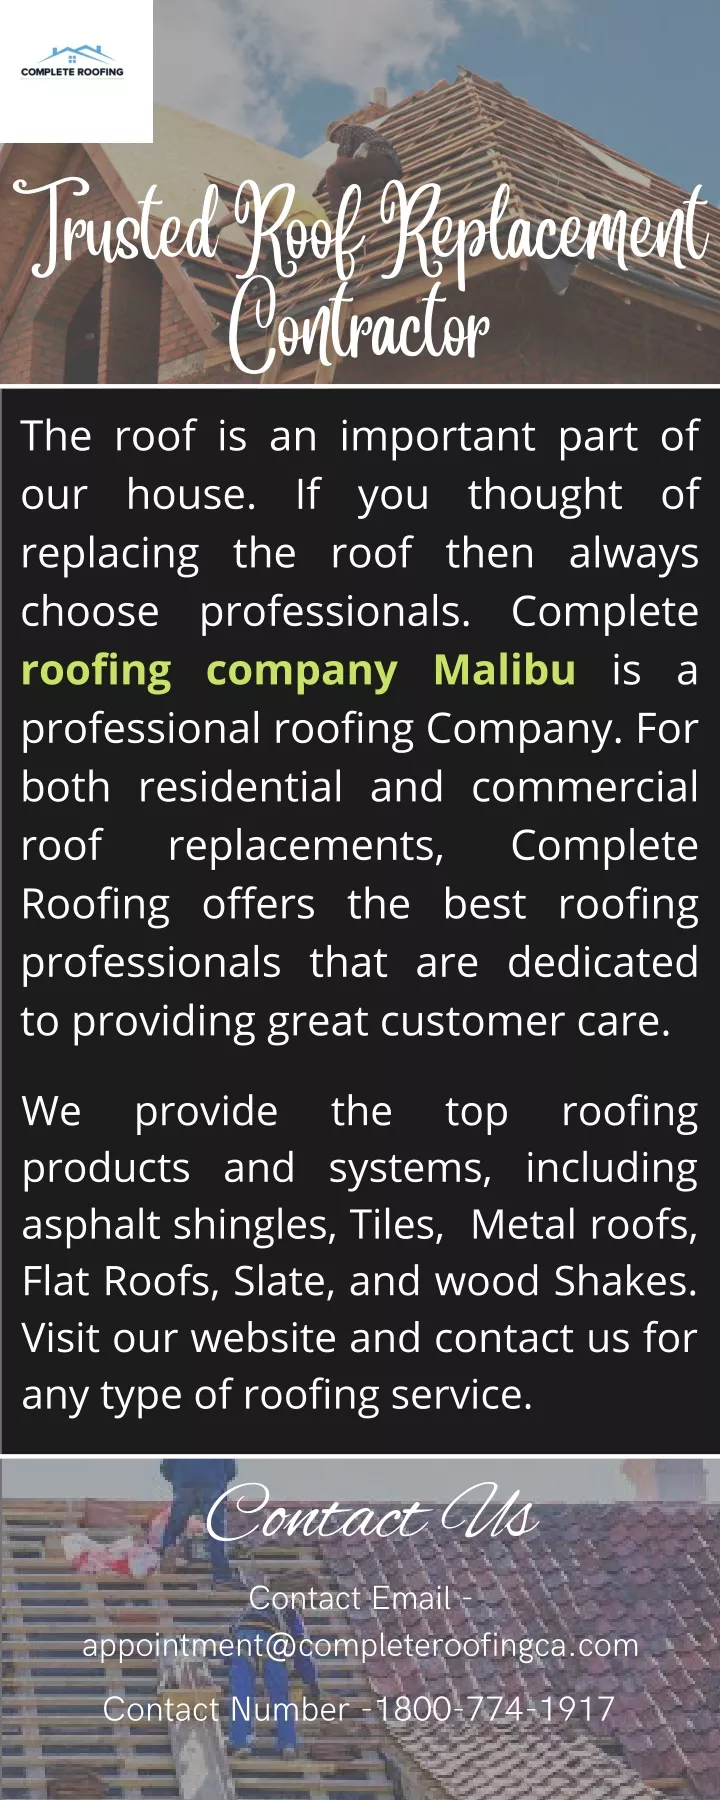 trusted roof replacement contractor the roof